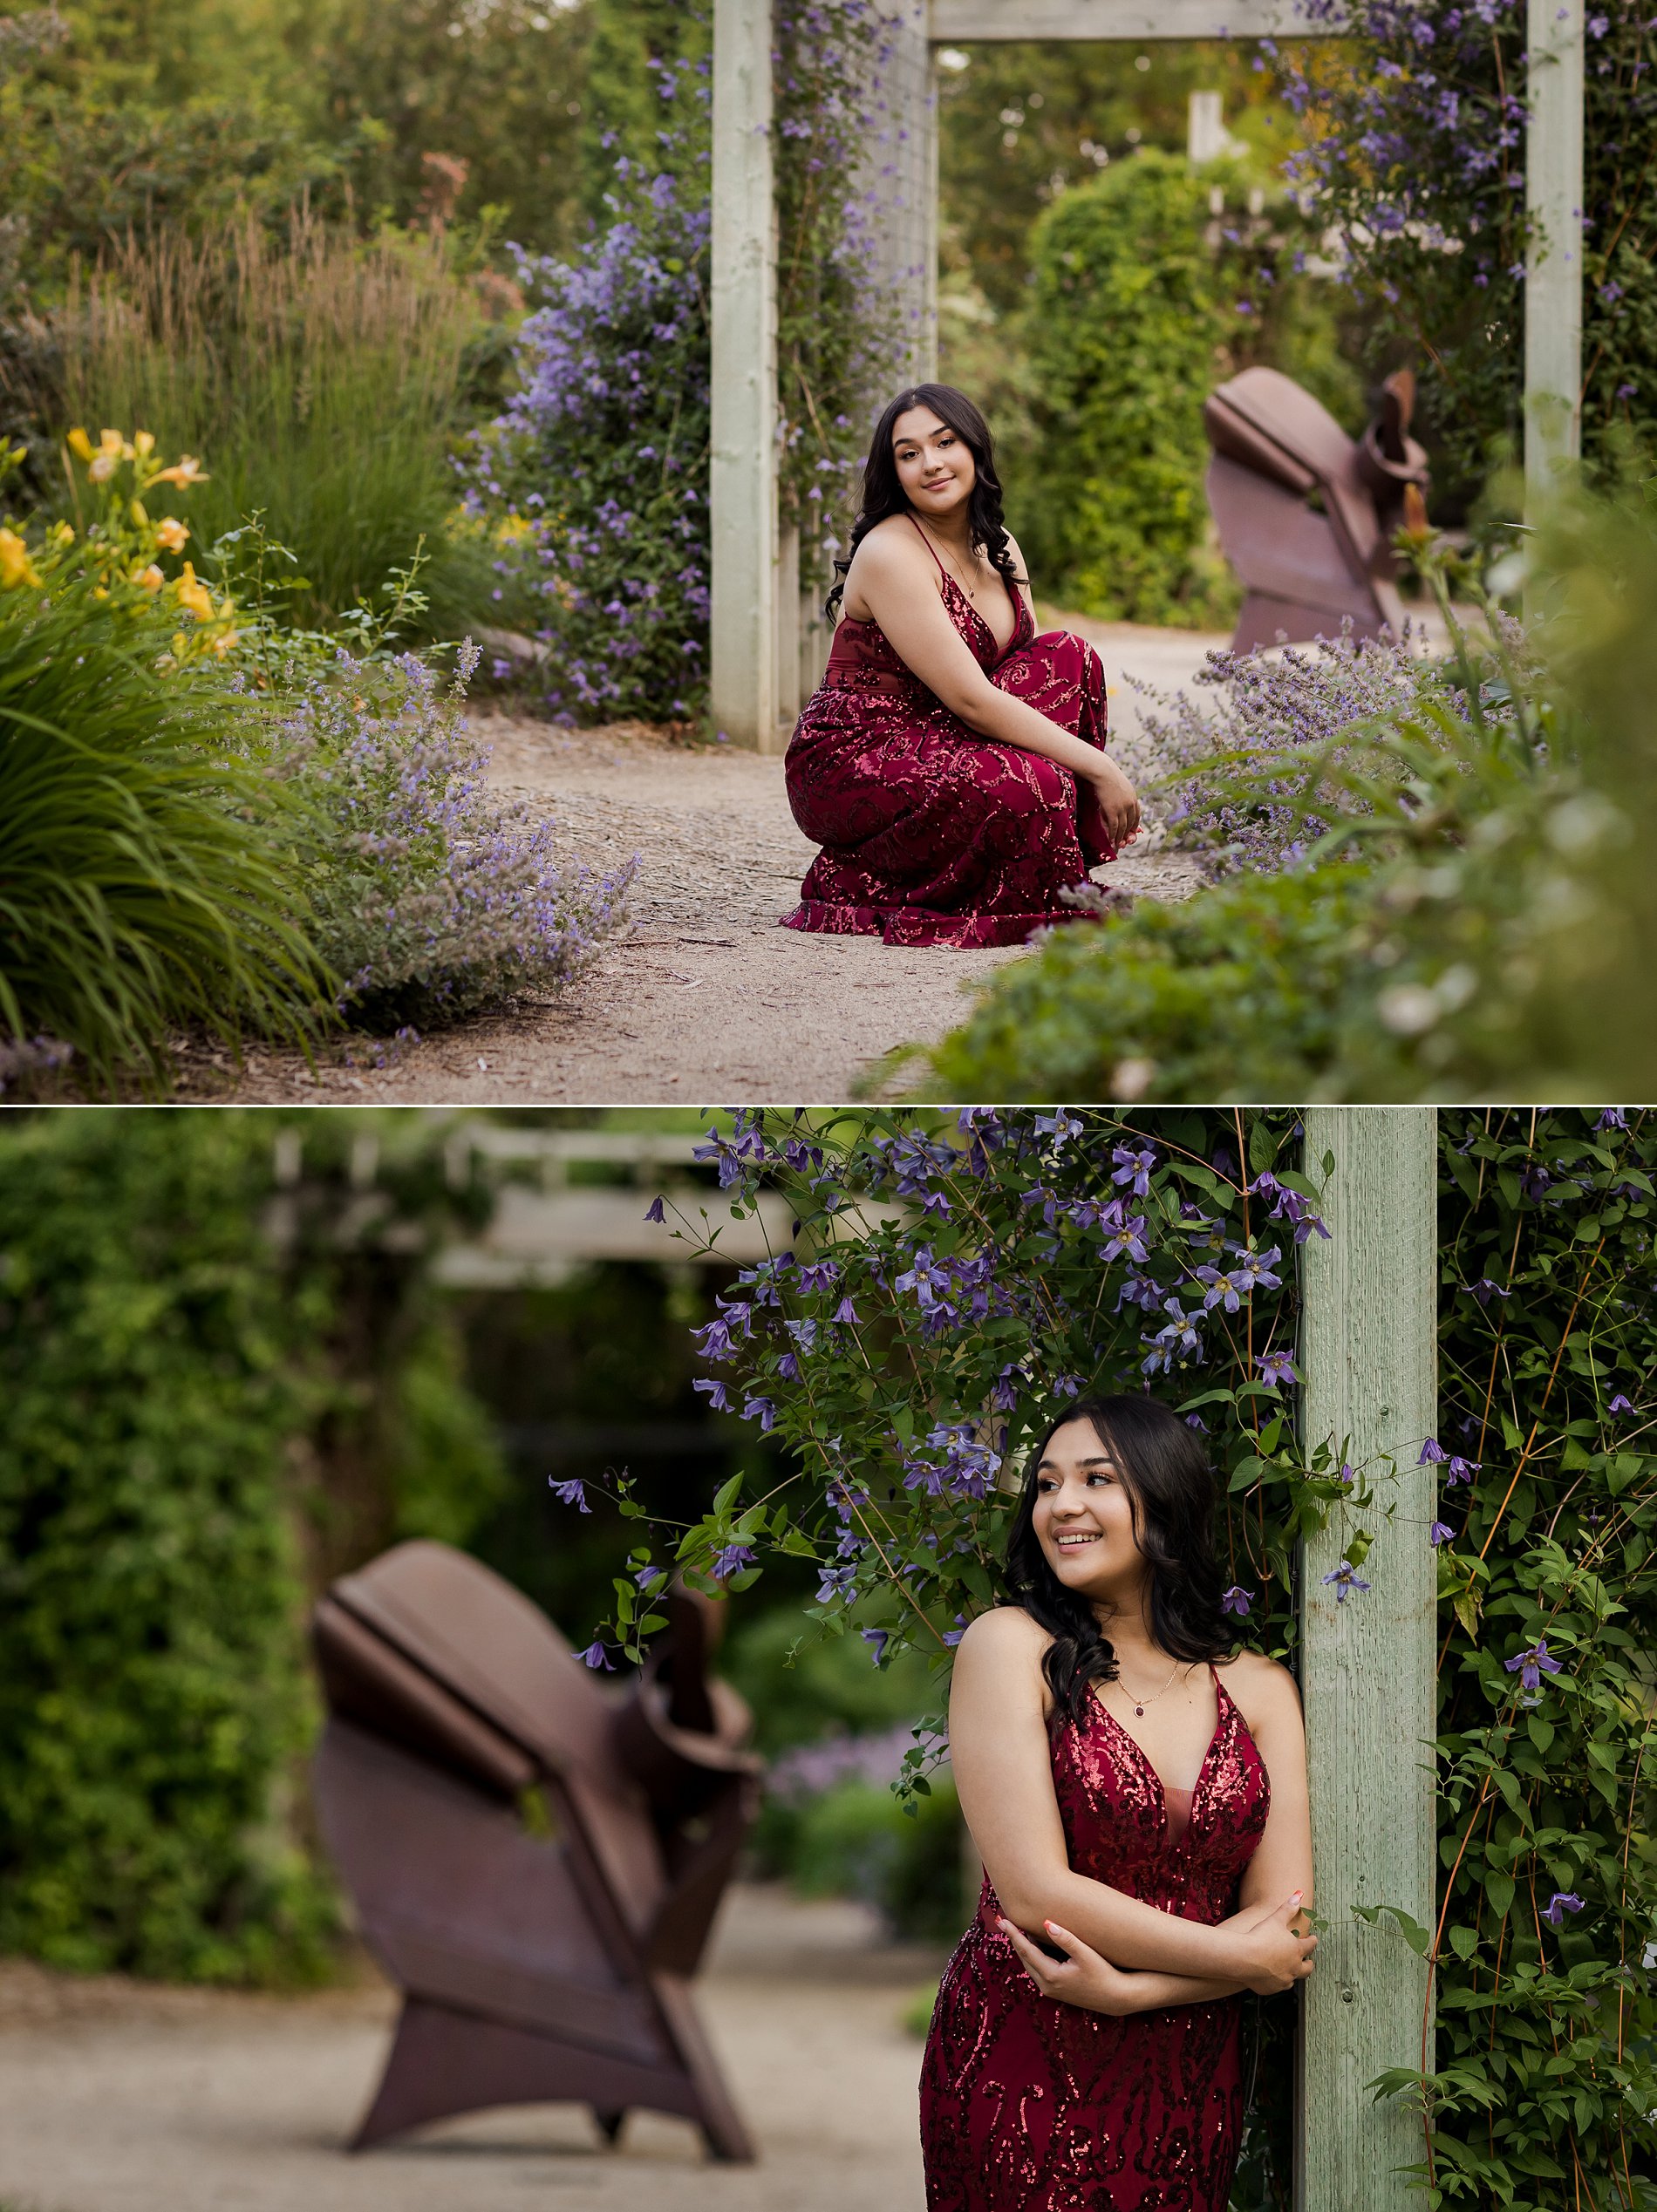 Graduation photos in a garden of colorful flowers at the Forestry Farm in Saskatoon.